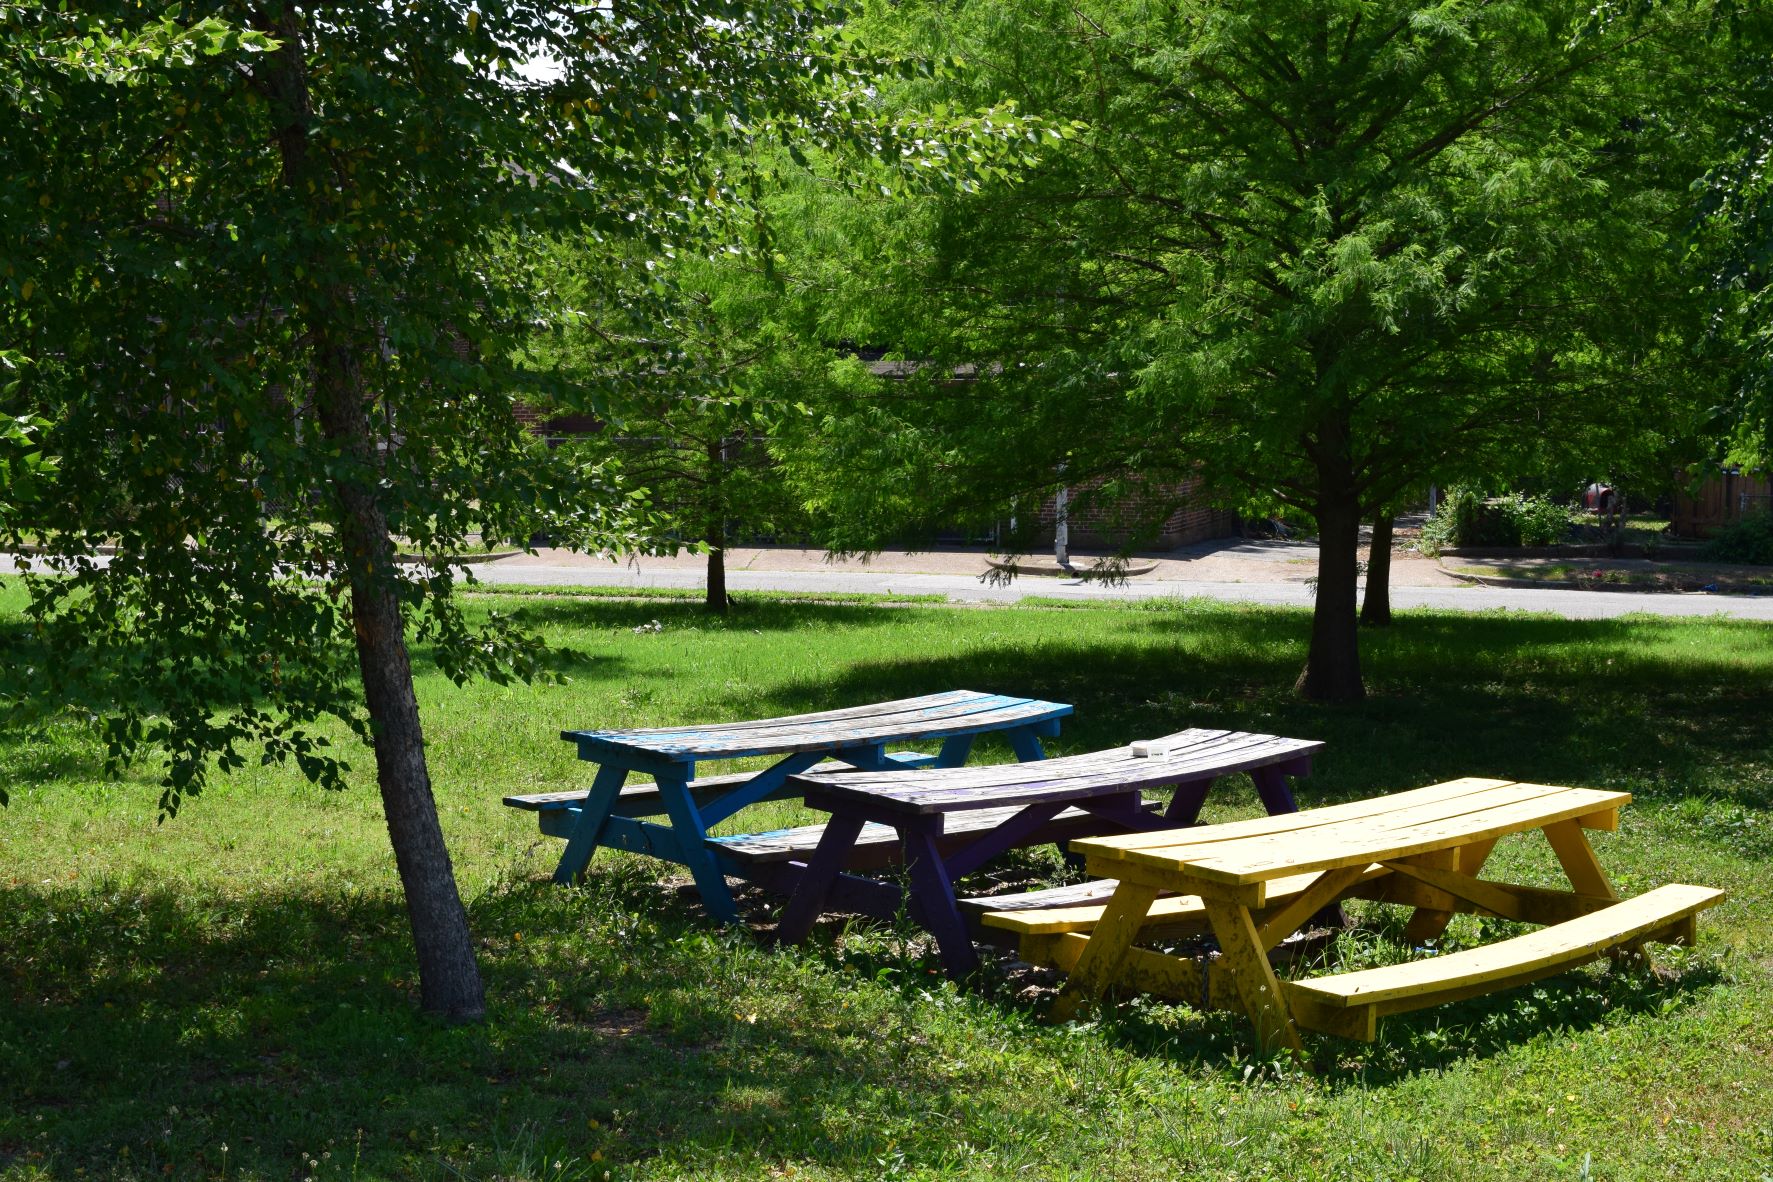 A blue, purple, and yellow picnic table in a row in a park.